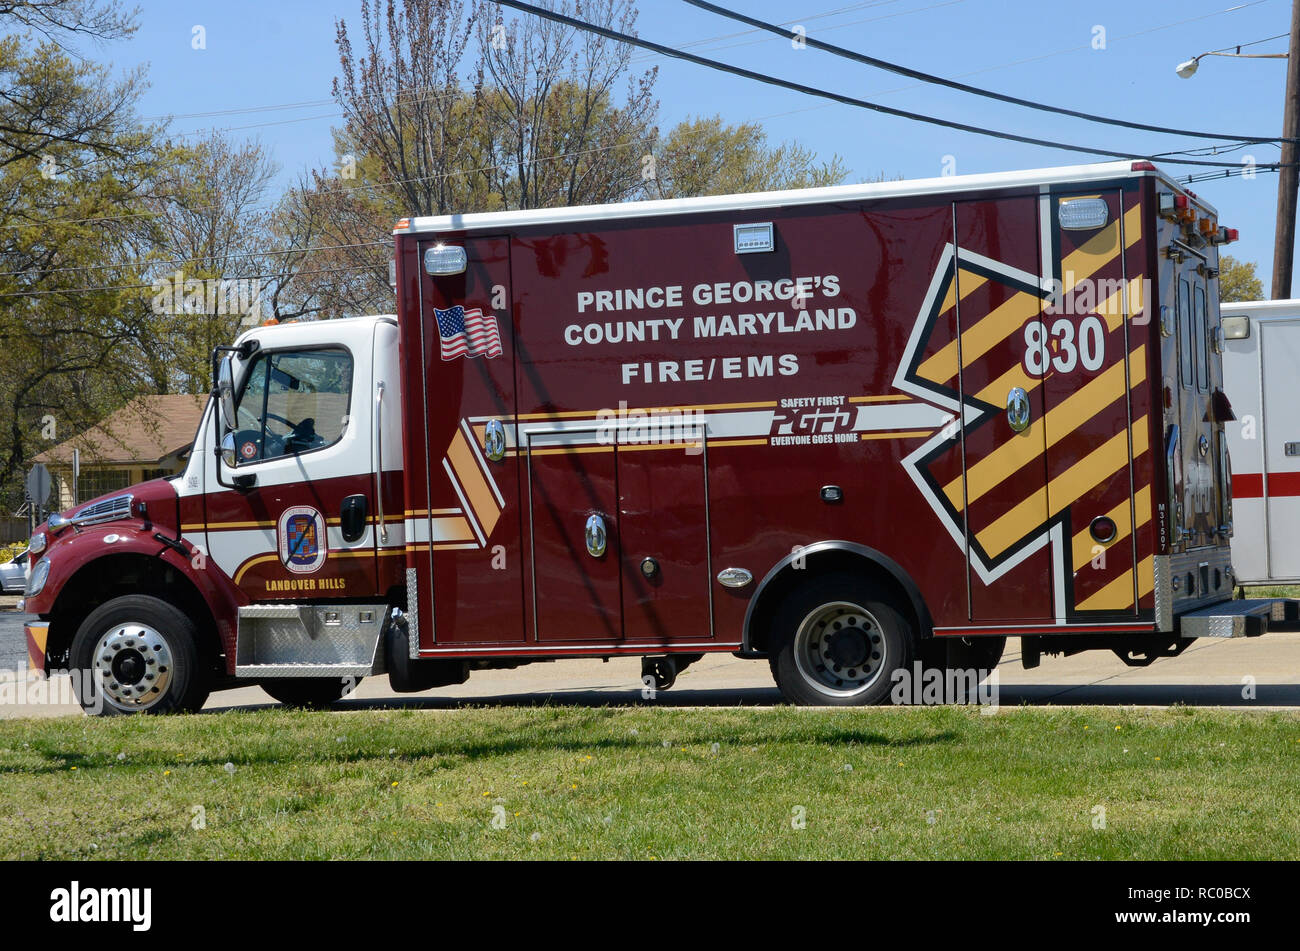 Ambulance from Prince George's County Maryland sits on front ramp of its firehouse in Landover Hills, Maryland Stock Photo